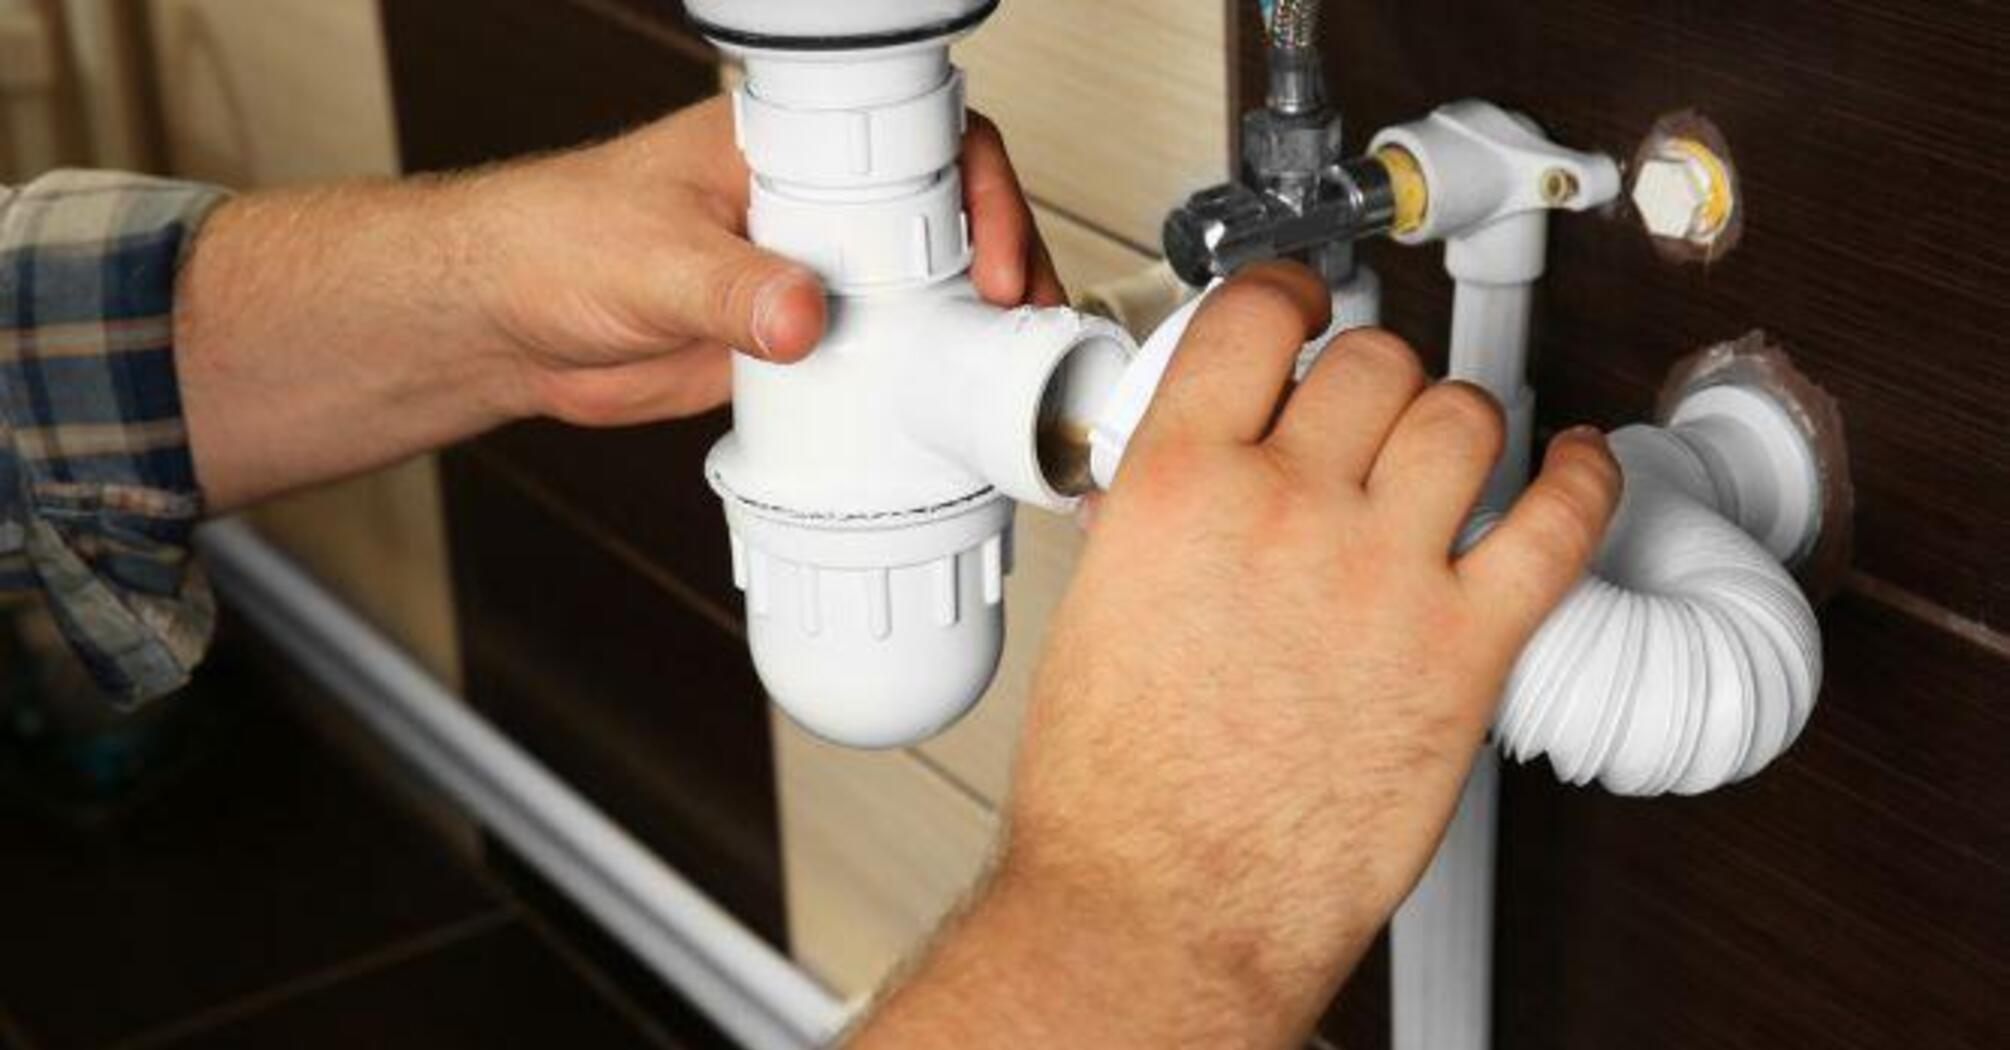 How to safely clean pipes and remove blockages